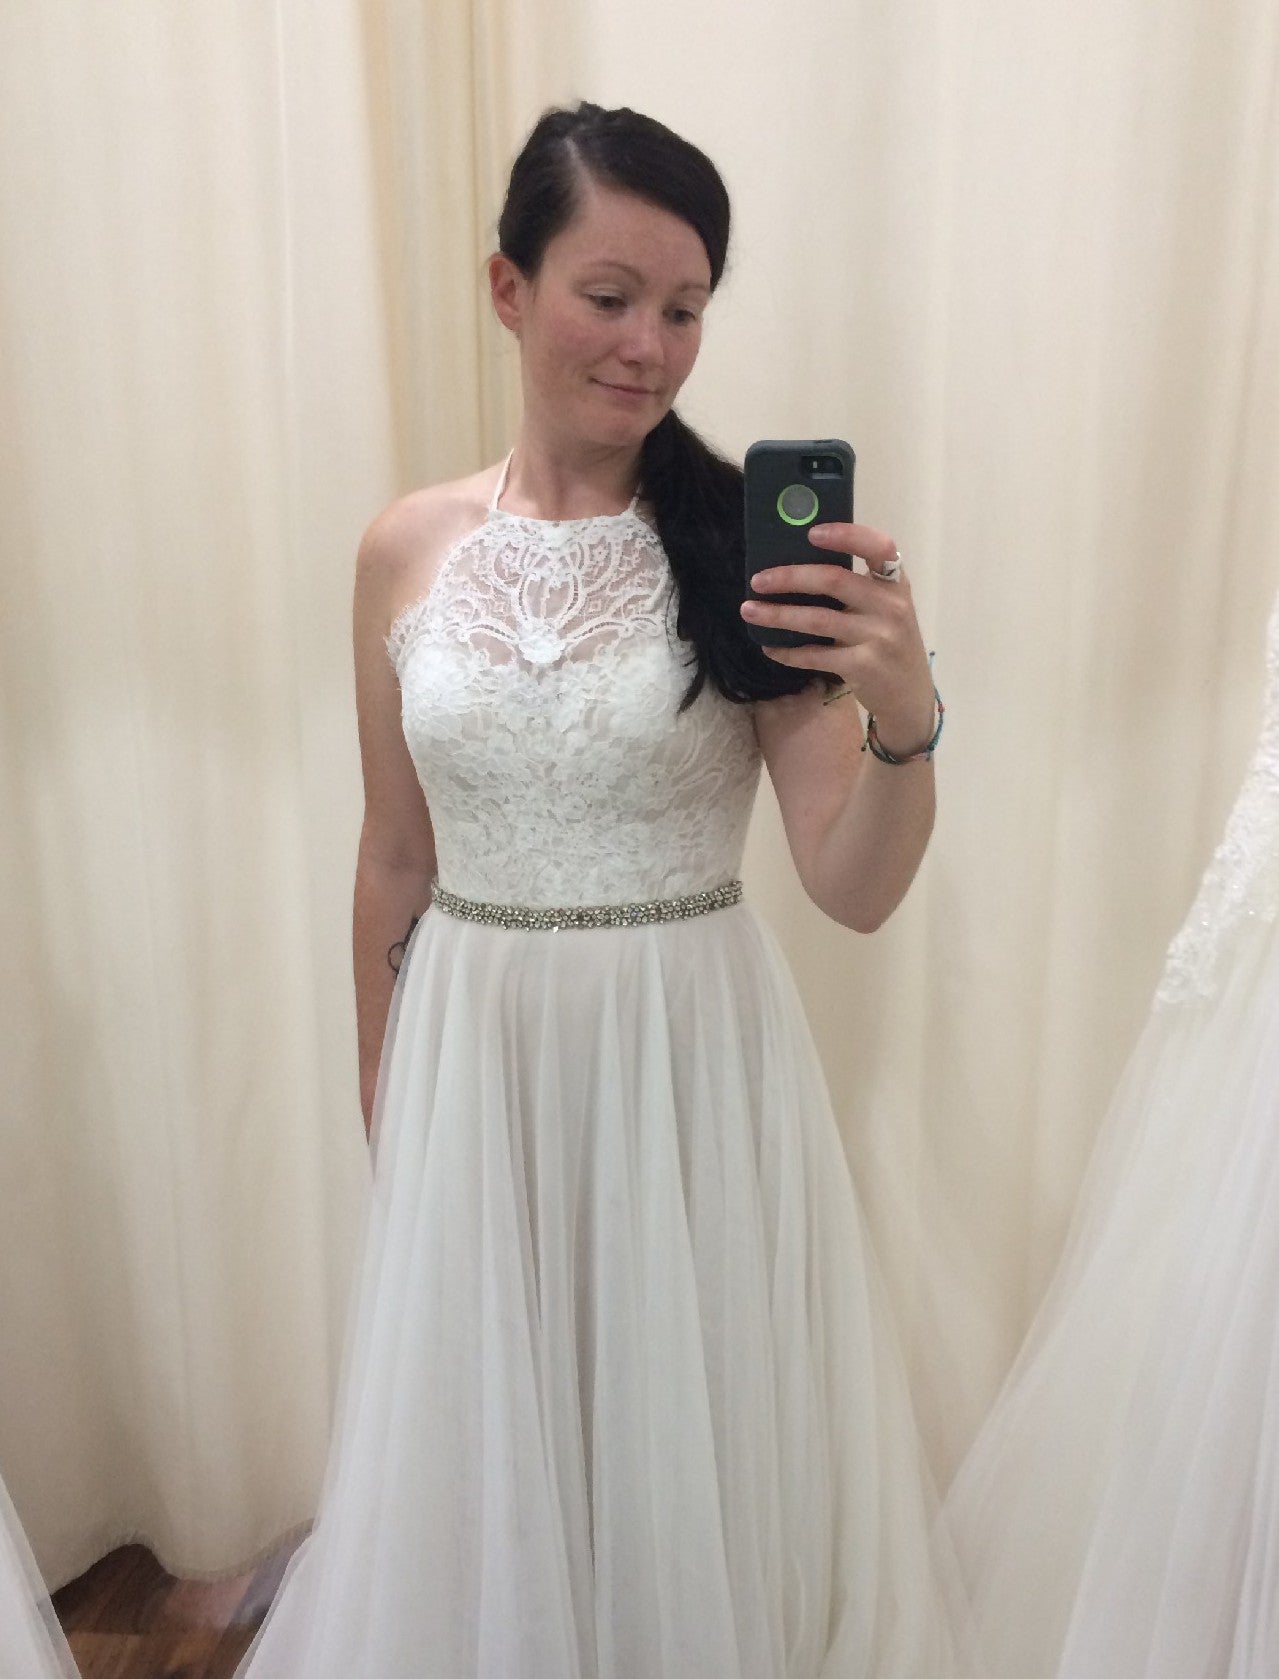 BHLDN Wtoo by Watters Claremore Gown